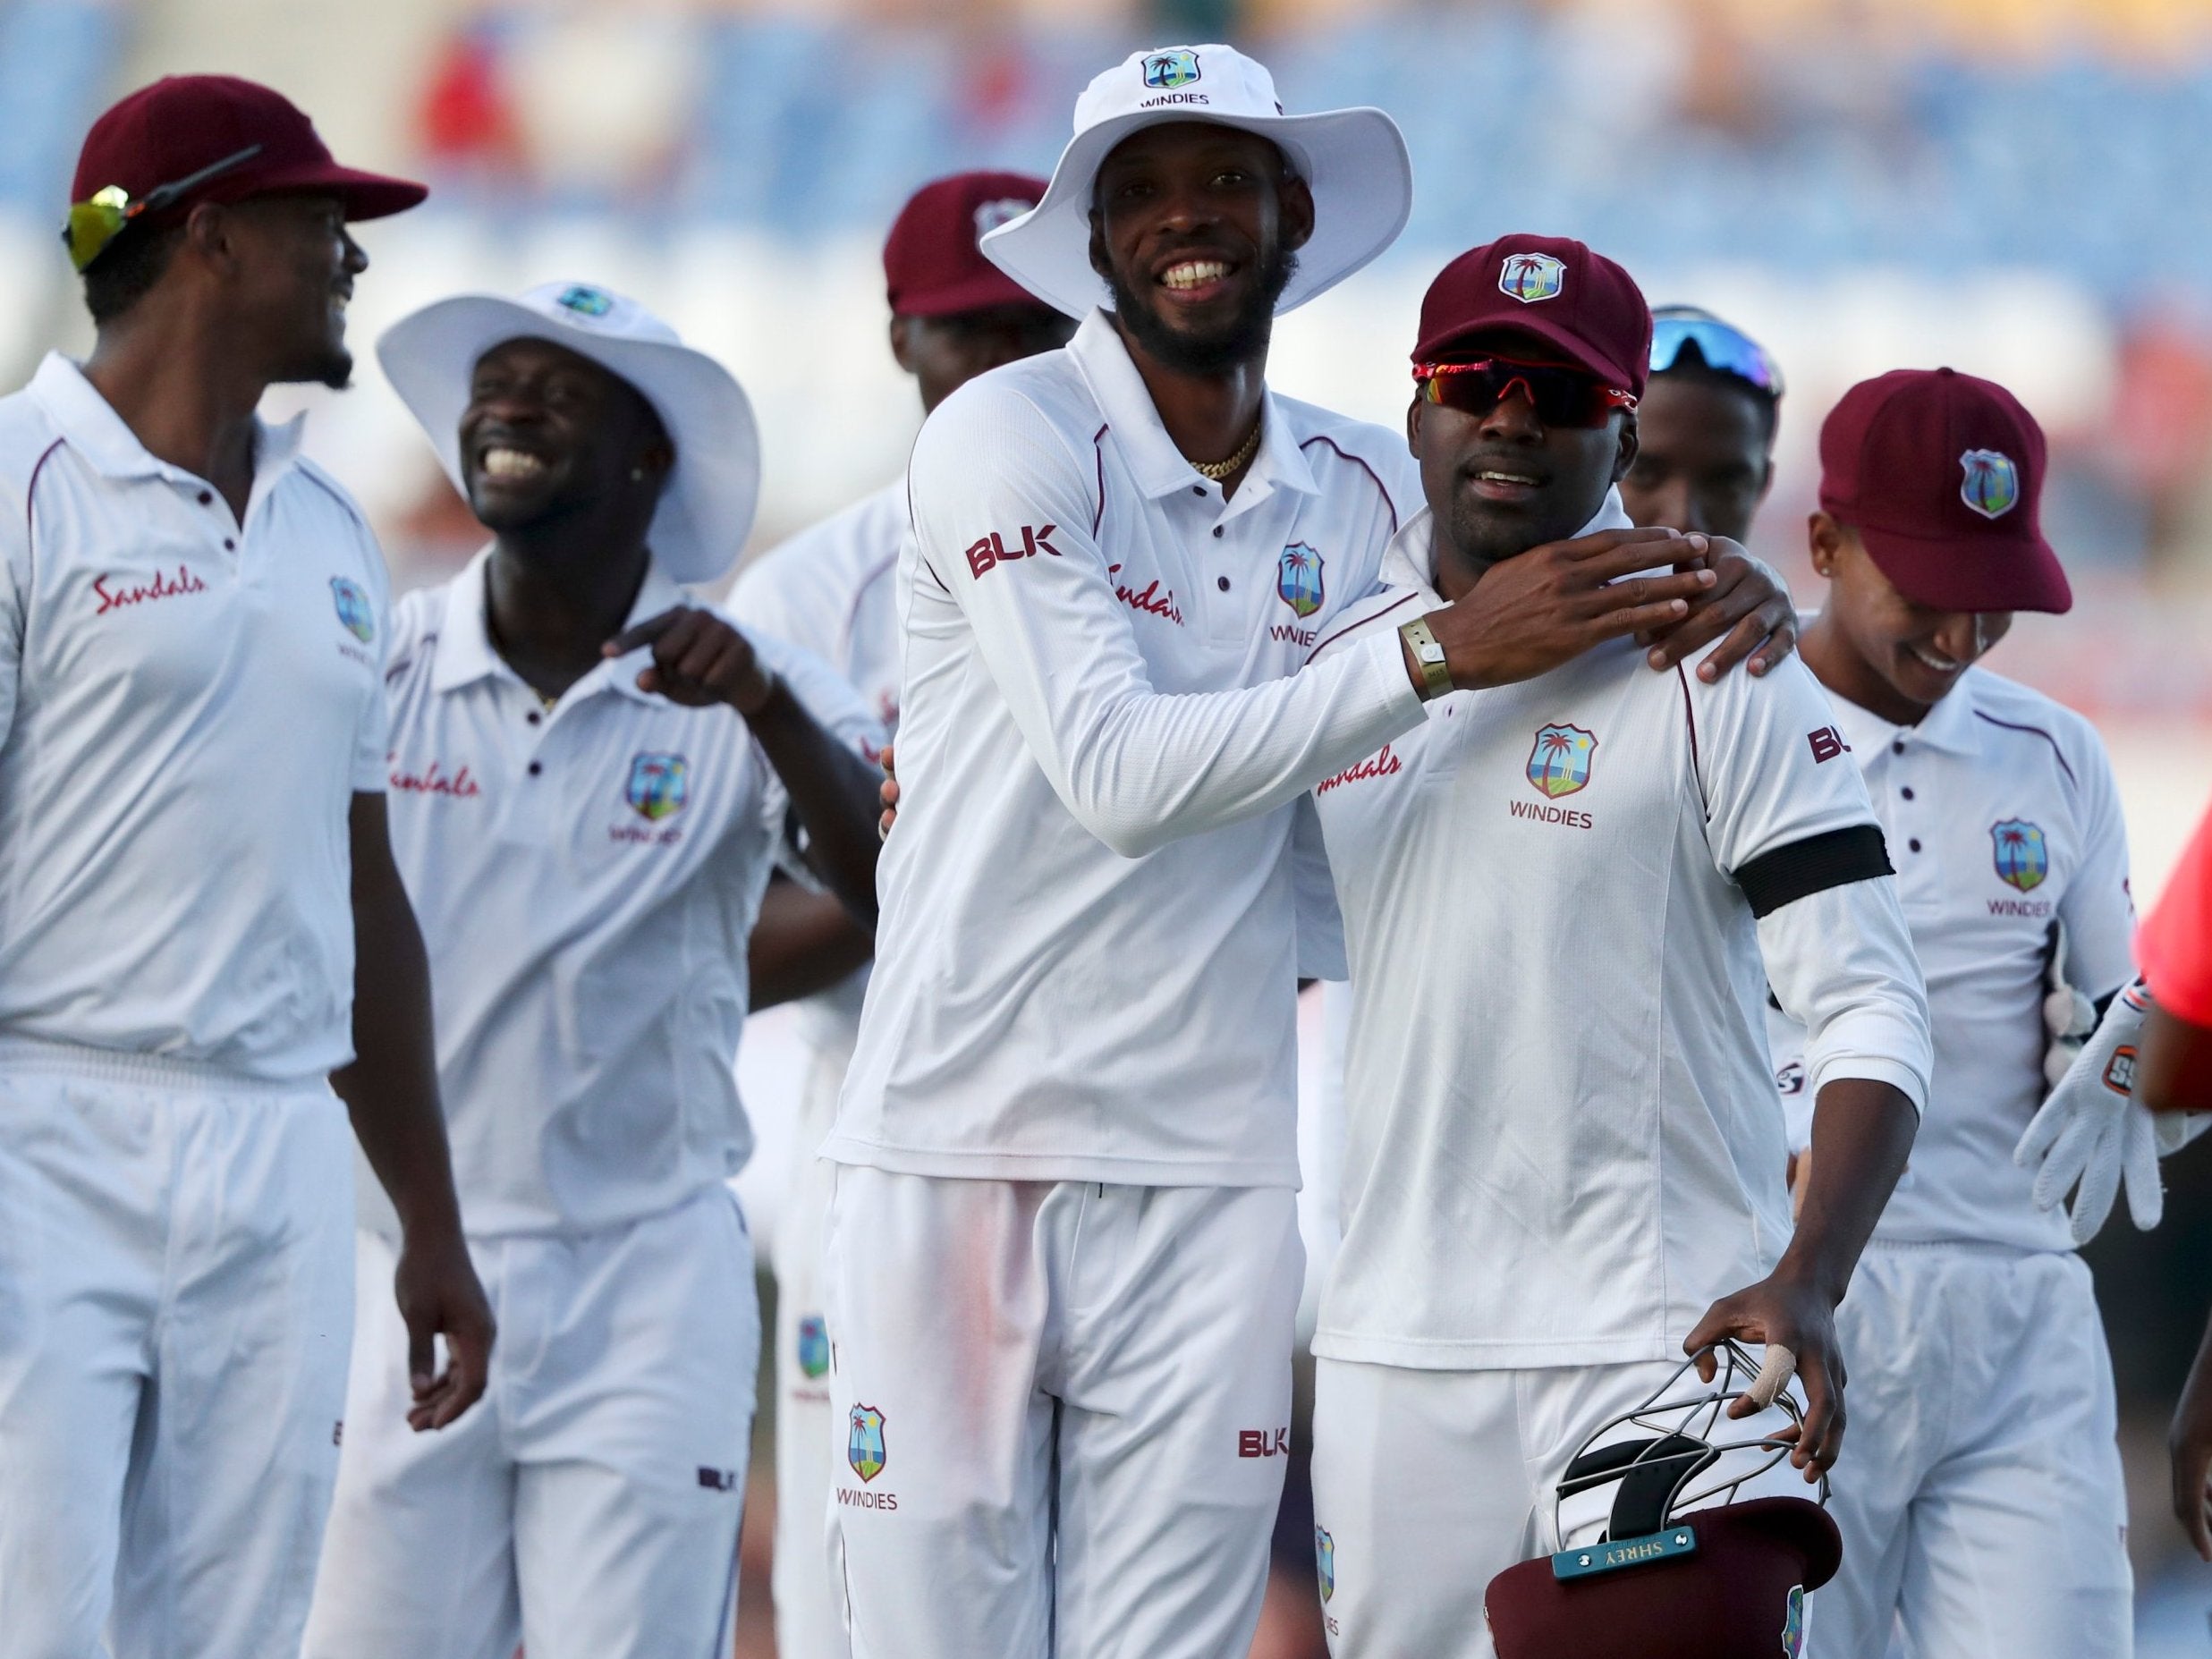 West Indies won by 10 wickets